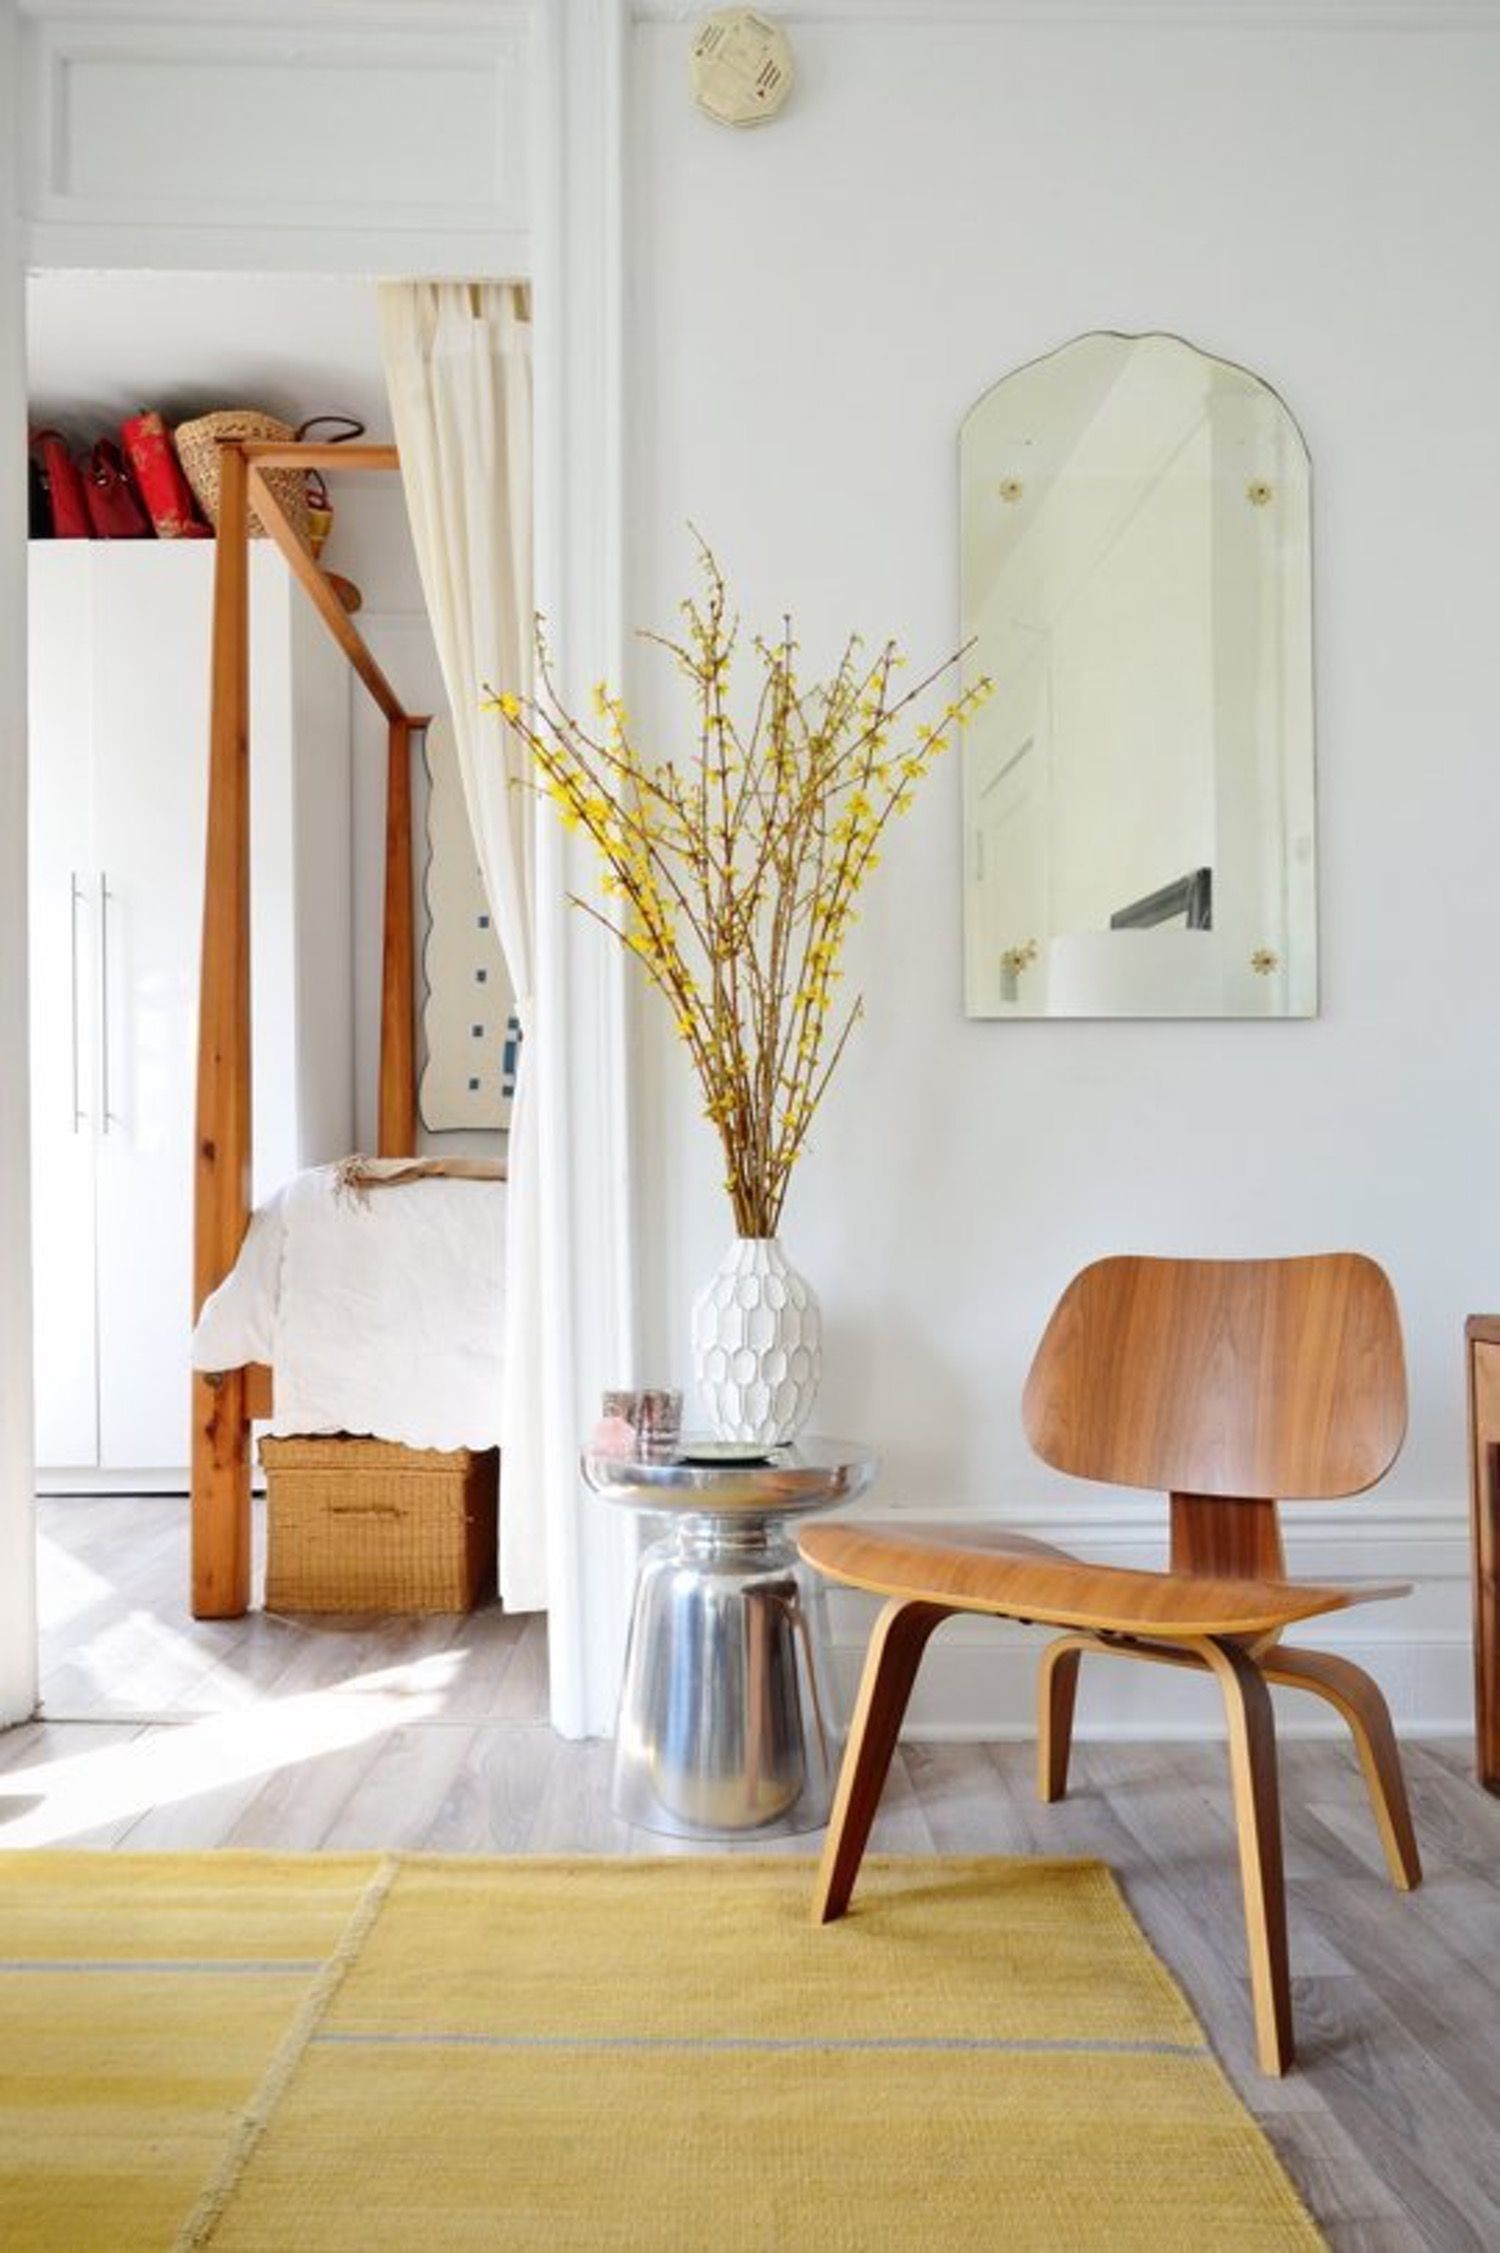 Minimalist Decor Ideas For Small Spaces: Simplify Your Home